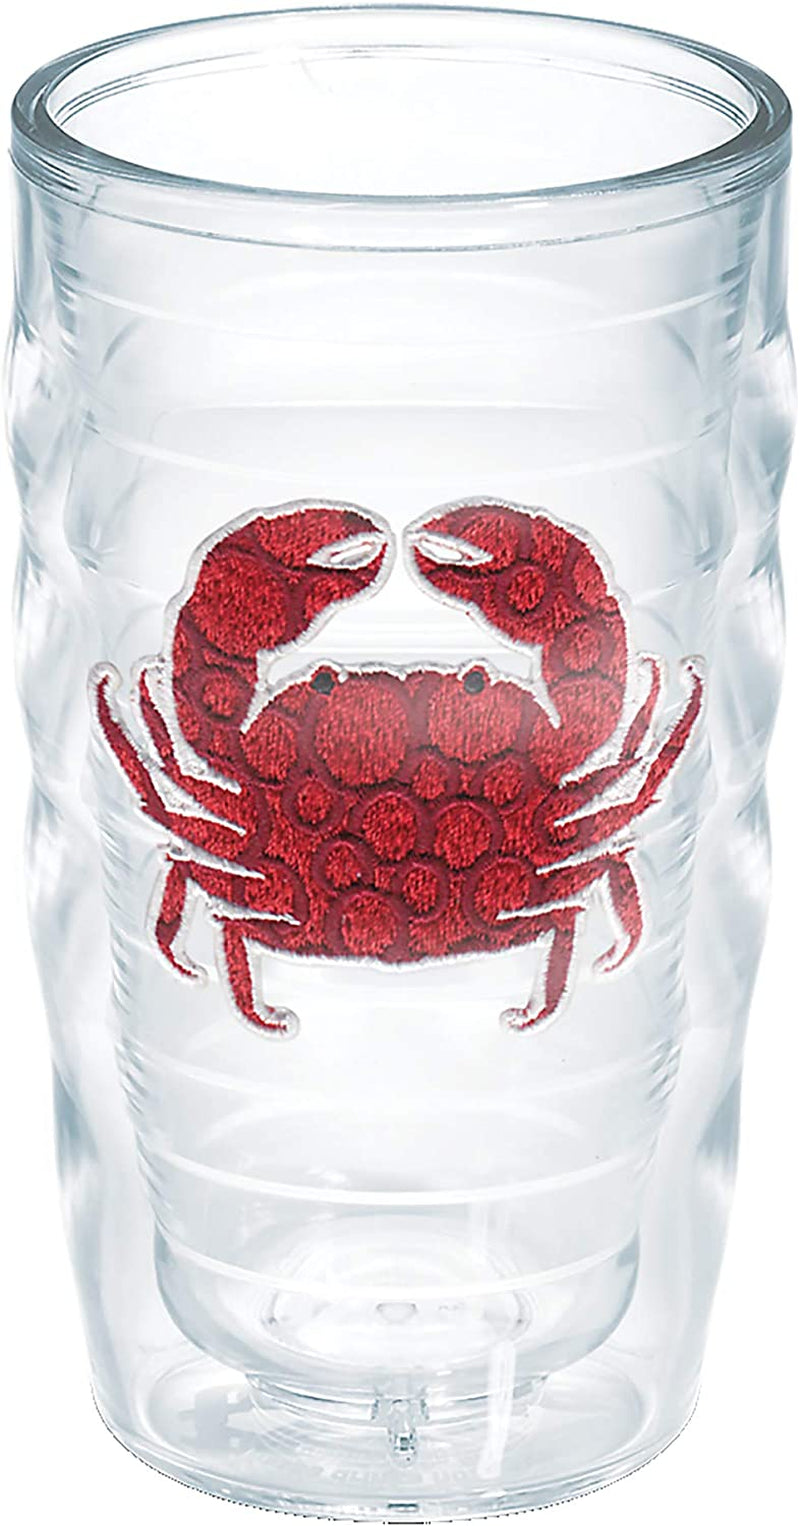 Tervis Crab Insulated Tumbler with Emblem and Red Lid, 16 Oz, Clear Home & Garden > Kitchen & Dining > Tableware > Drinkware Tervis No Lid 10oz Wavy 